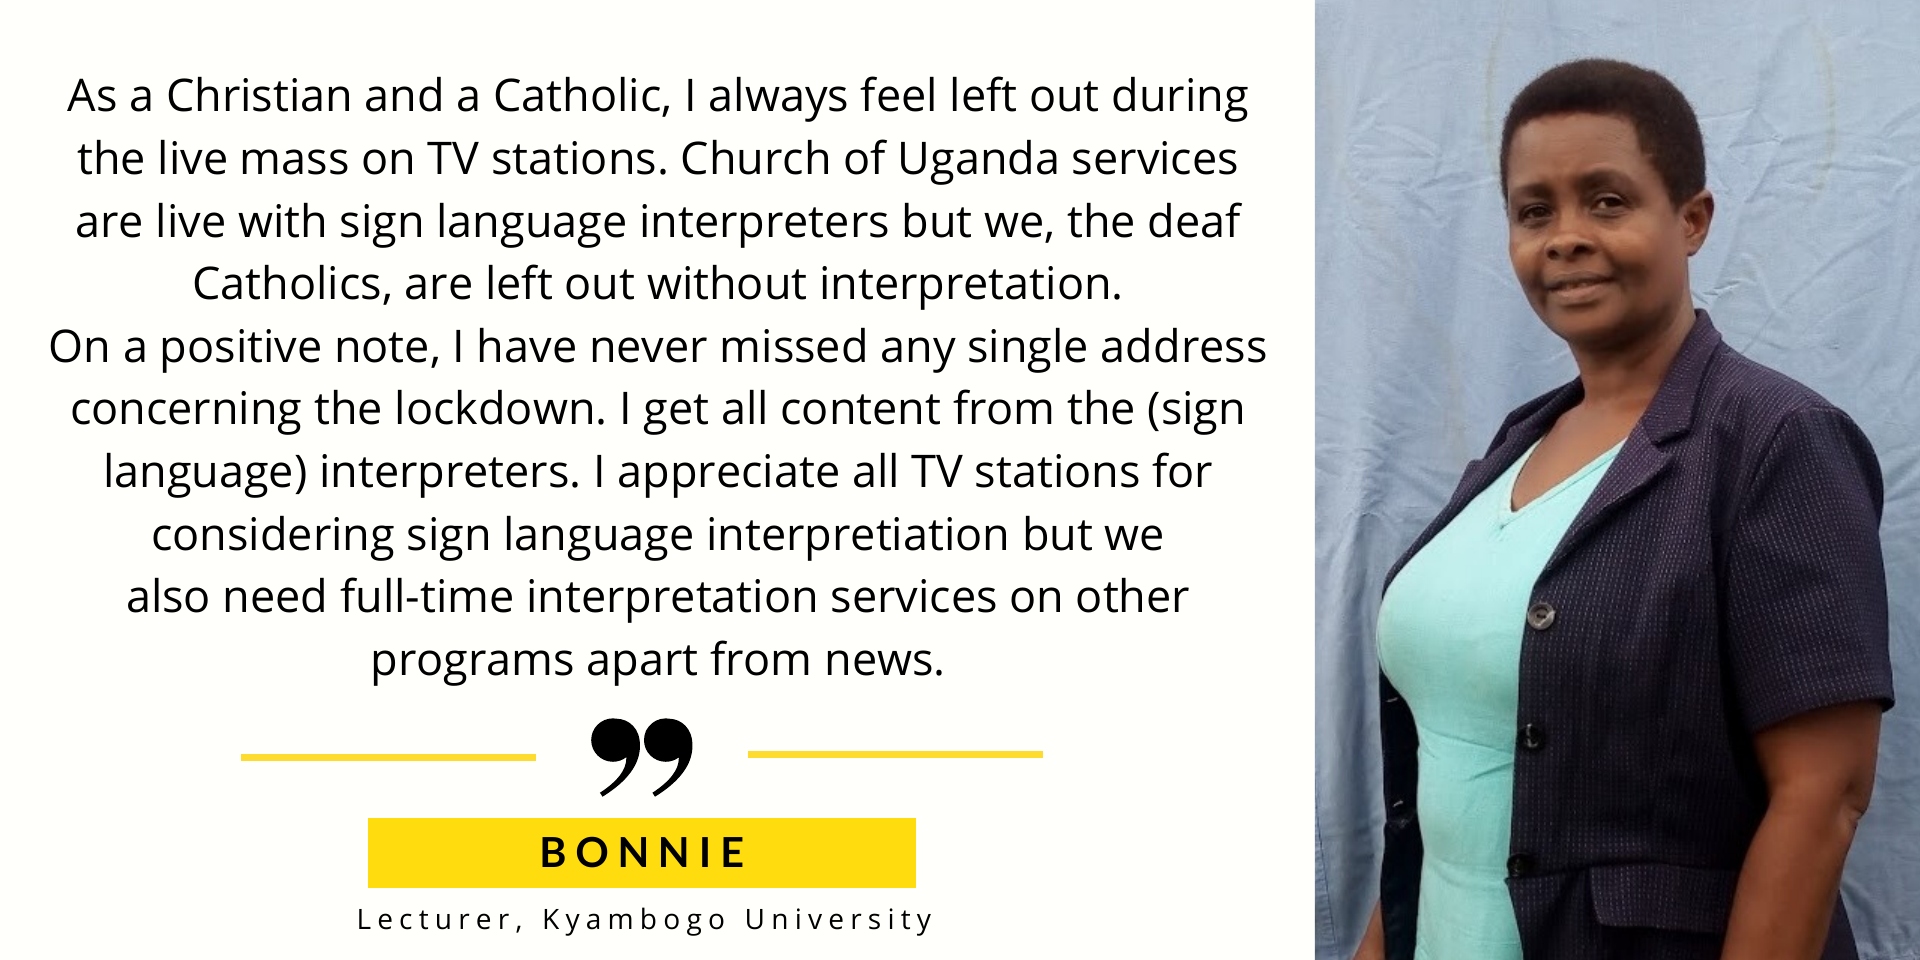 Bonnie Lecturer says Is there a way to get interpretation for church services? As a Christian and a Catholic, I always get left out during live mass on all TV stations. Church of Uganda services are live with sign language interpreters but we the deaf catholics are left out without interpretation. On a positive note, I have never missed any single addresses concerning the lockdown. I get all content from the (sign language) interpreters.